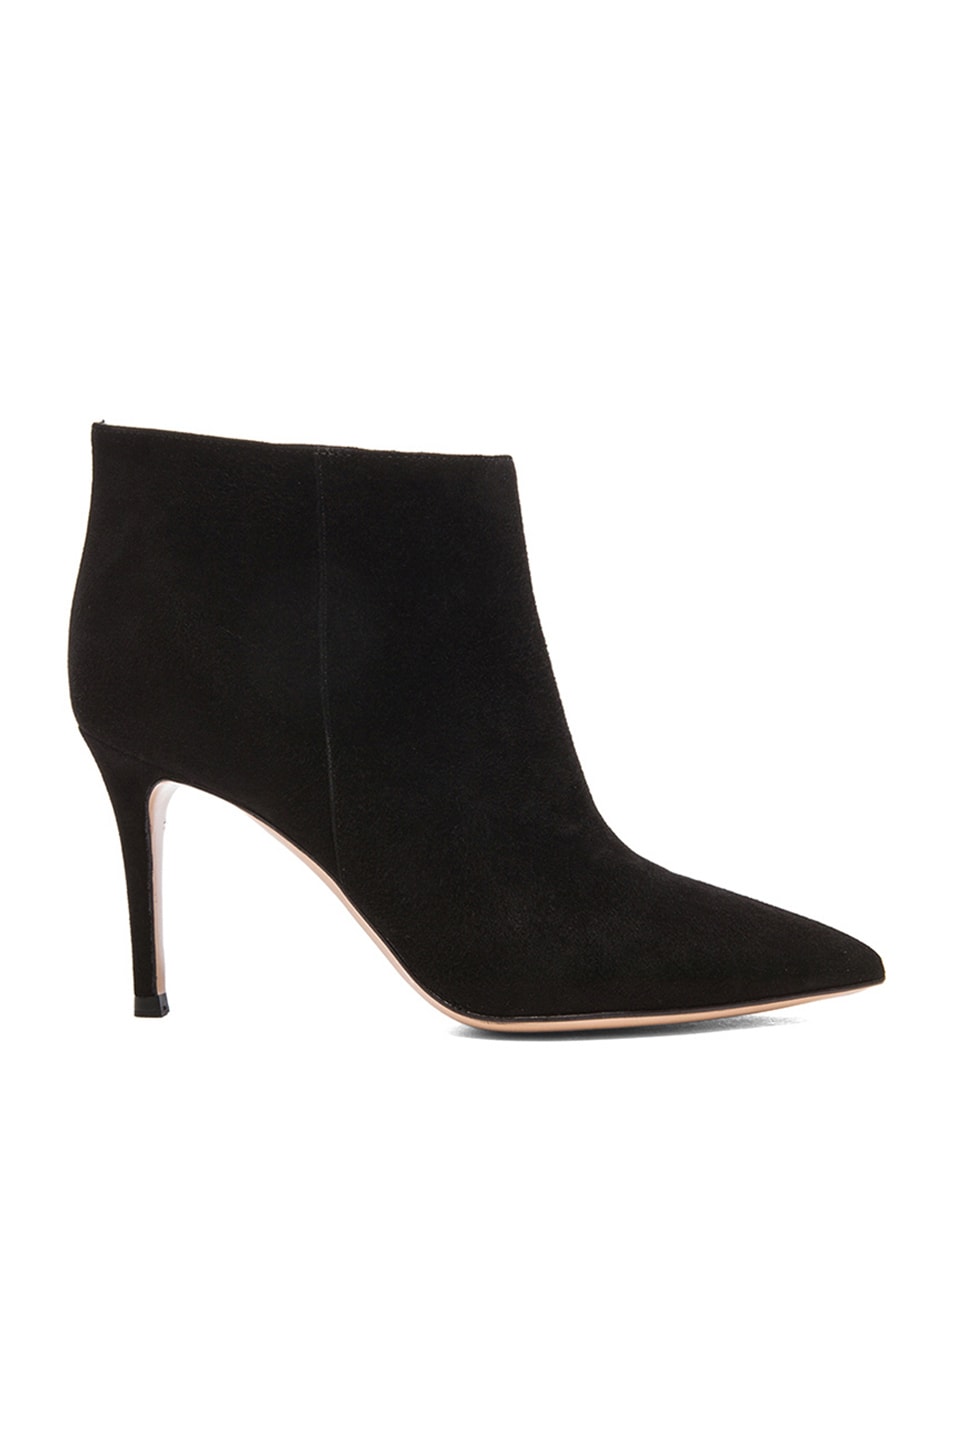 Gianvito Rossi Pointed Suede Ankle Booties in Black | FWRD